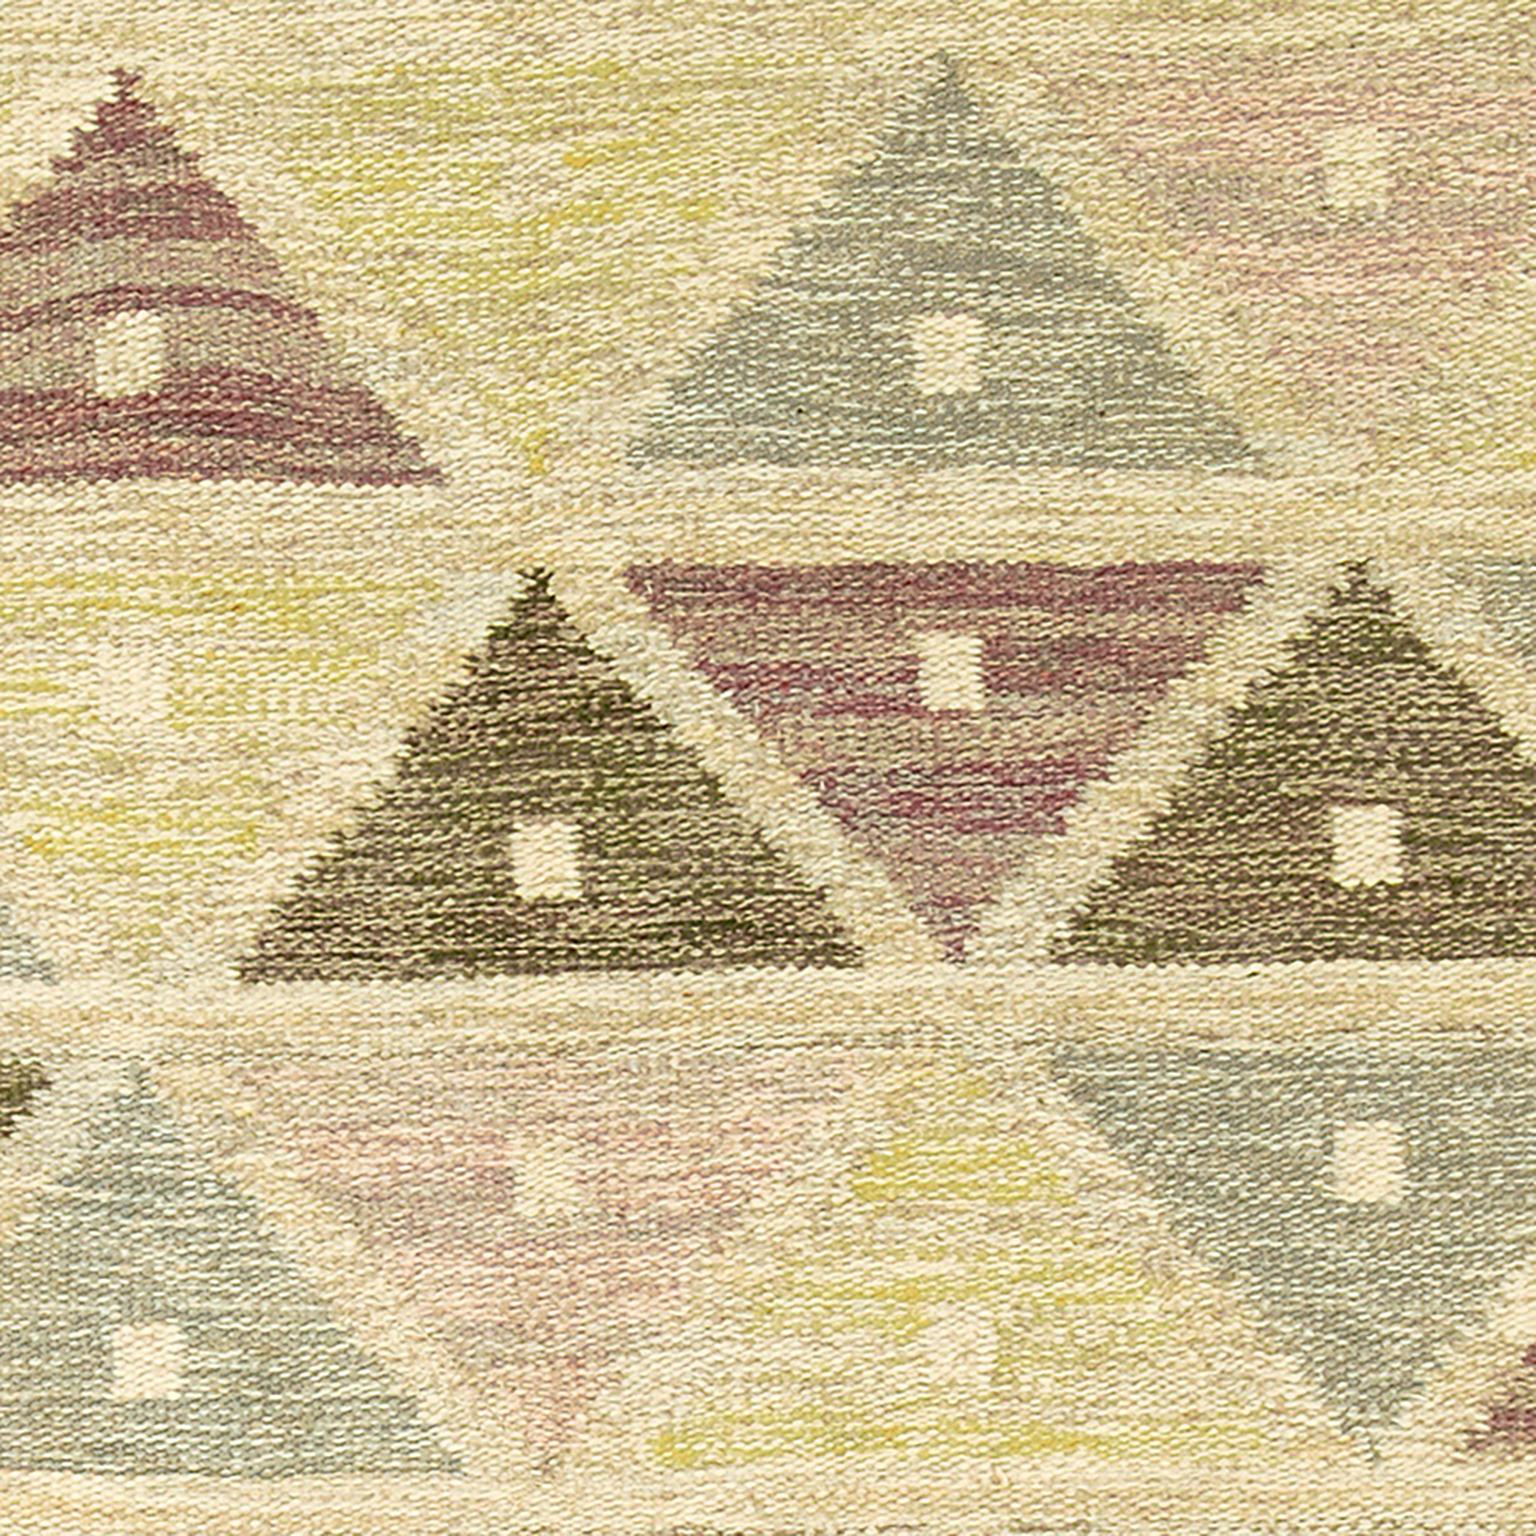 20th Century Swedish Flat-Weave Rug by Sigvard Bernadotte For Sale